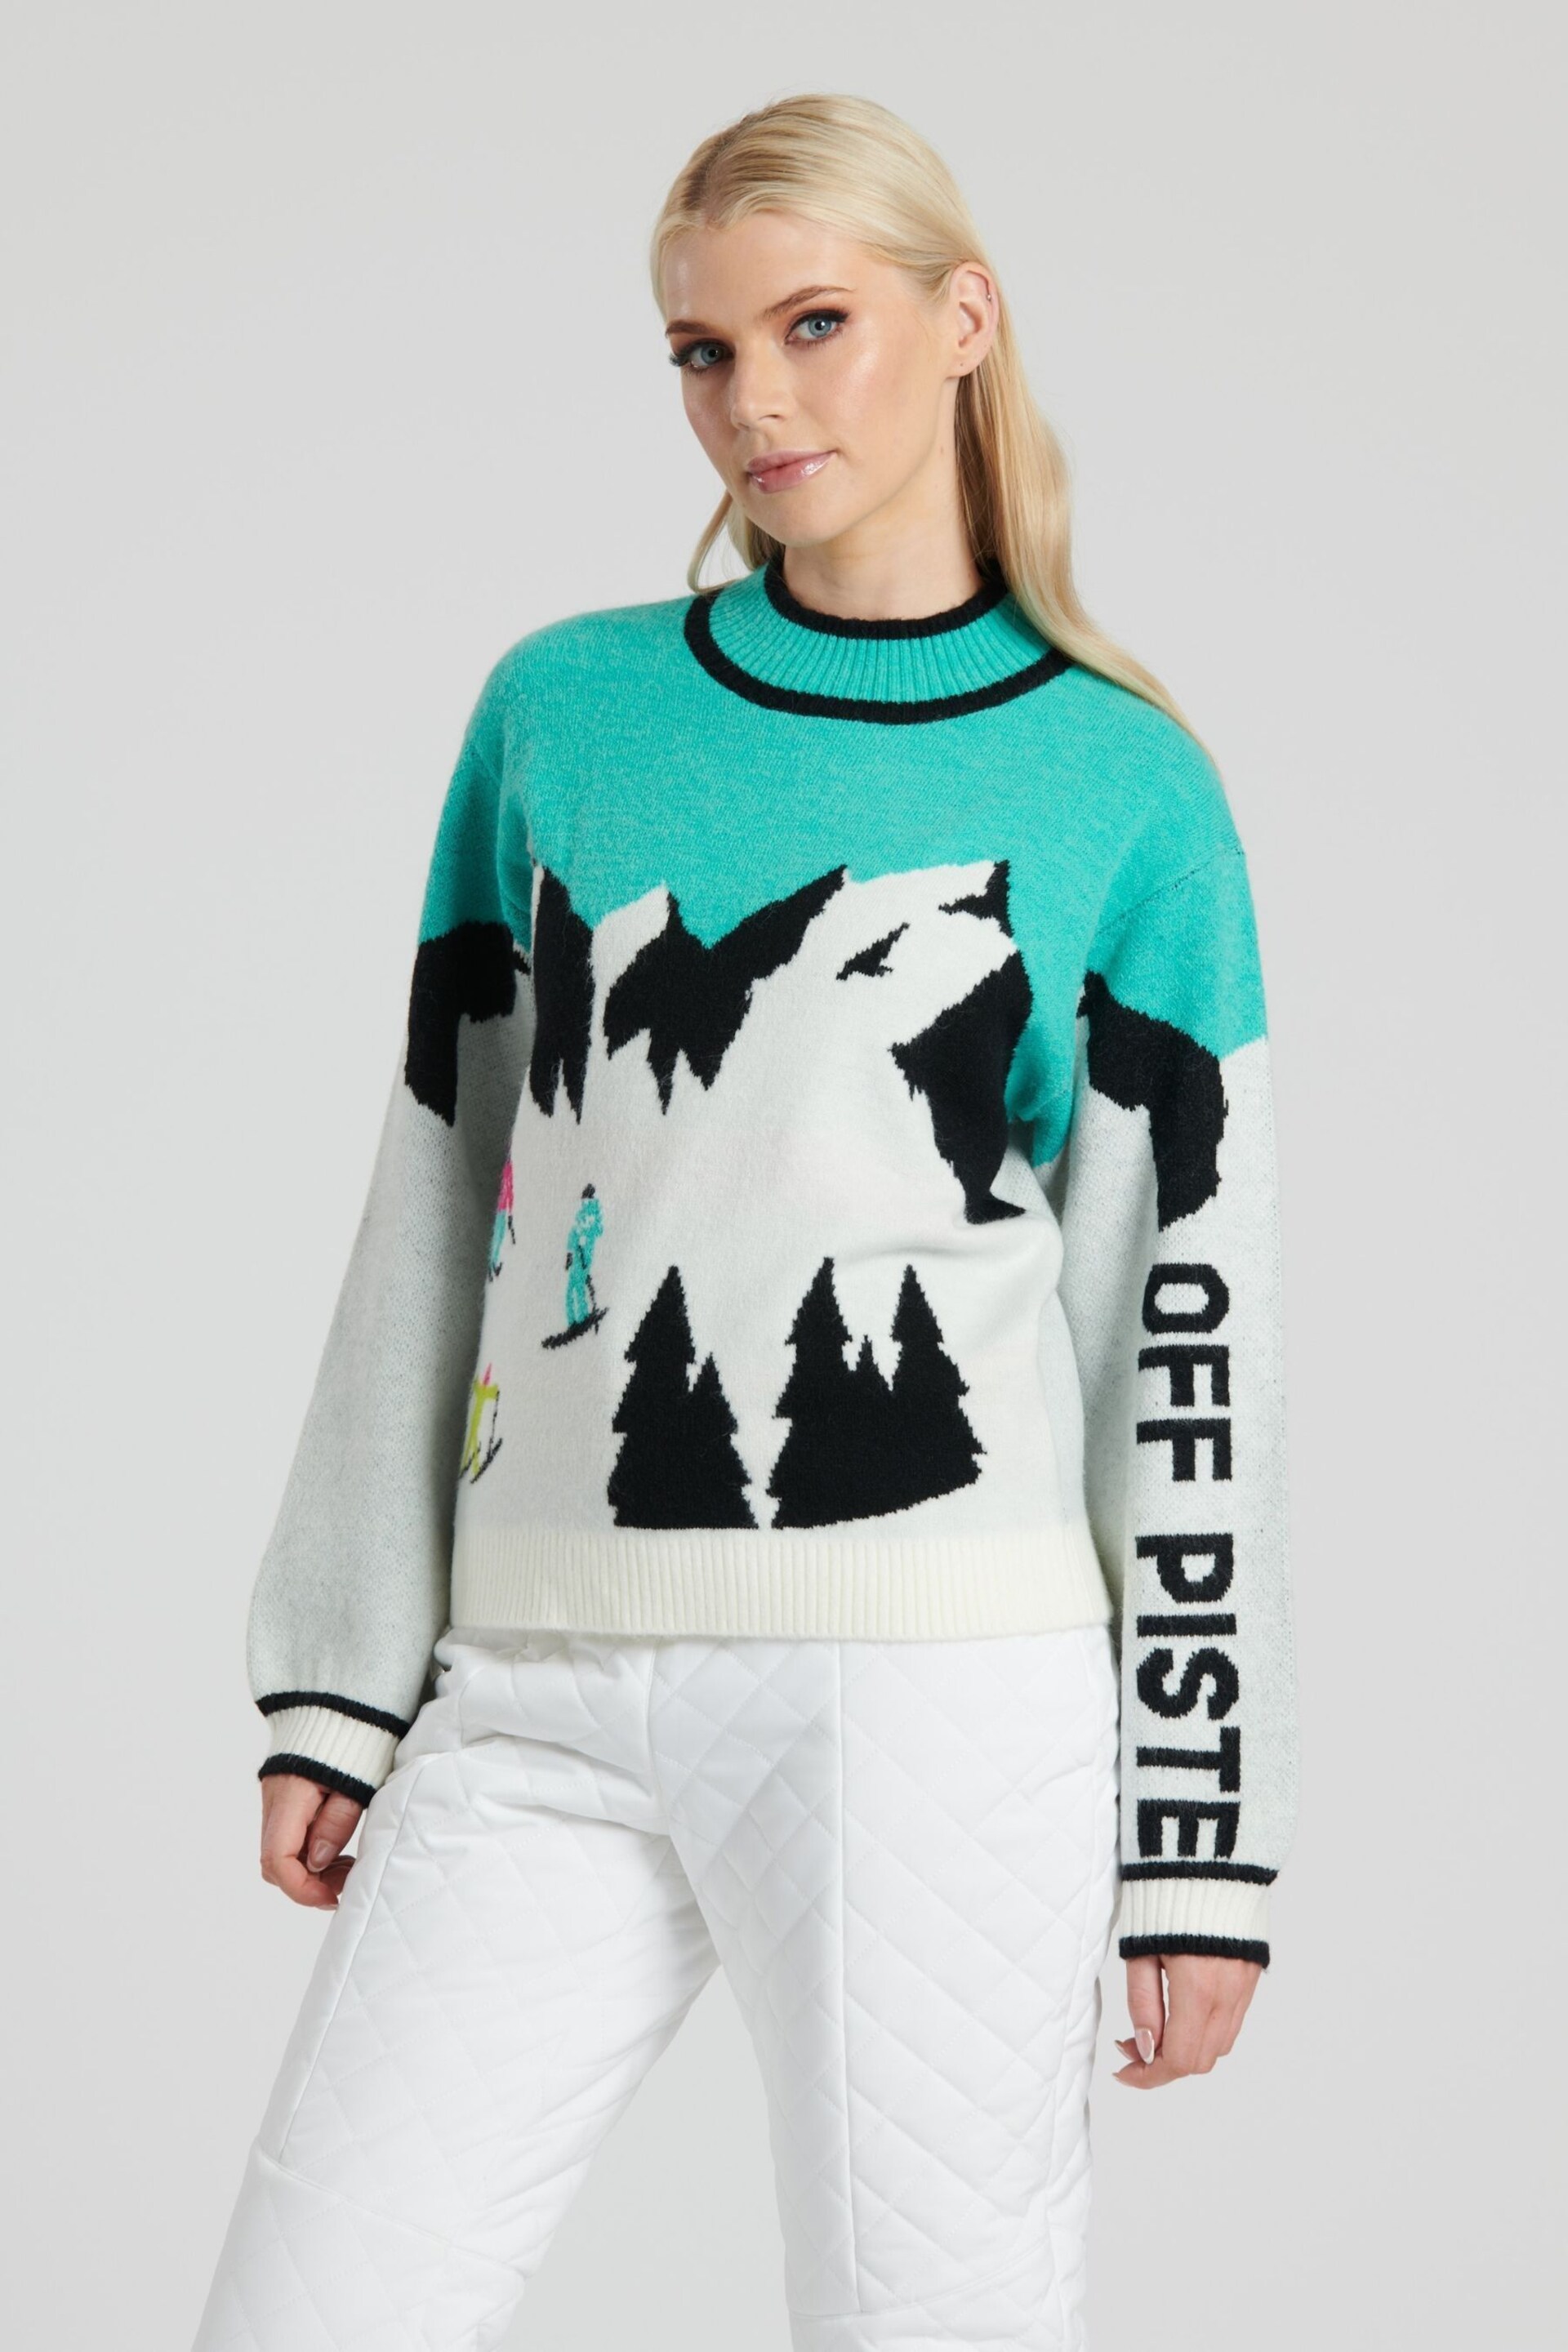 South Beach Blue Funnel Neck Knit Jumper - Image 4 of 5